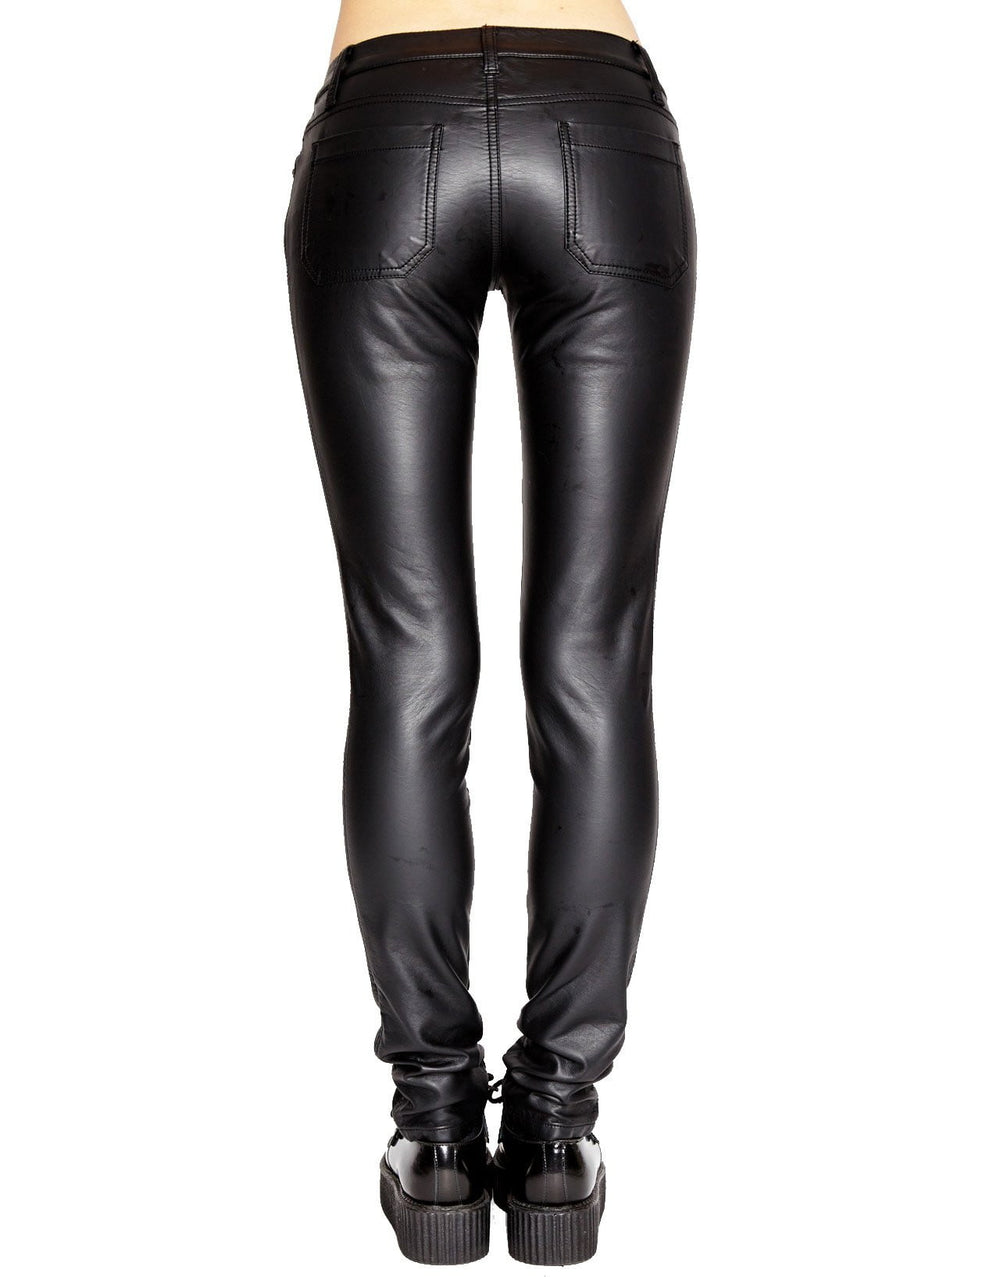 Tripp NYC Ladies Deville Pleather Faux Leather Jeans - Vampirefreaks Store